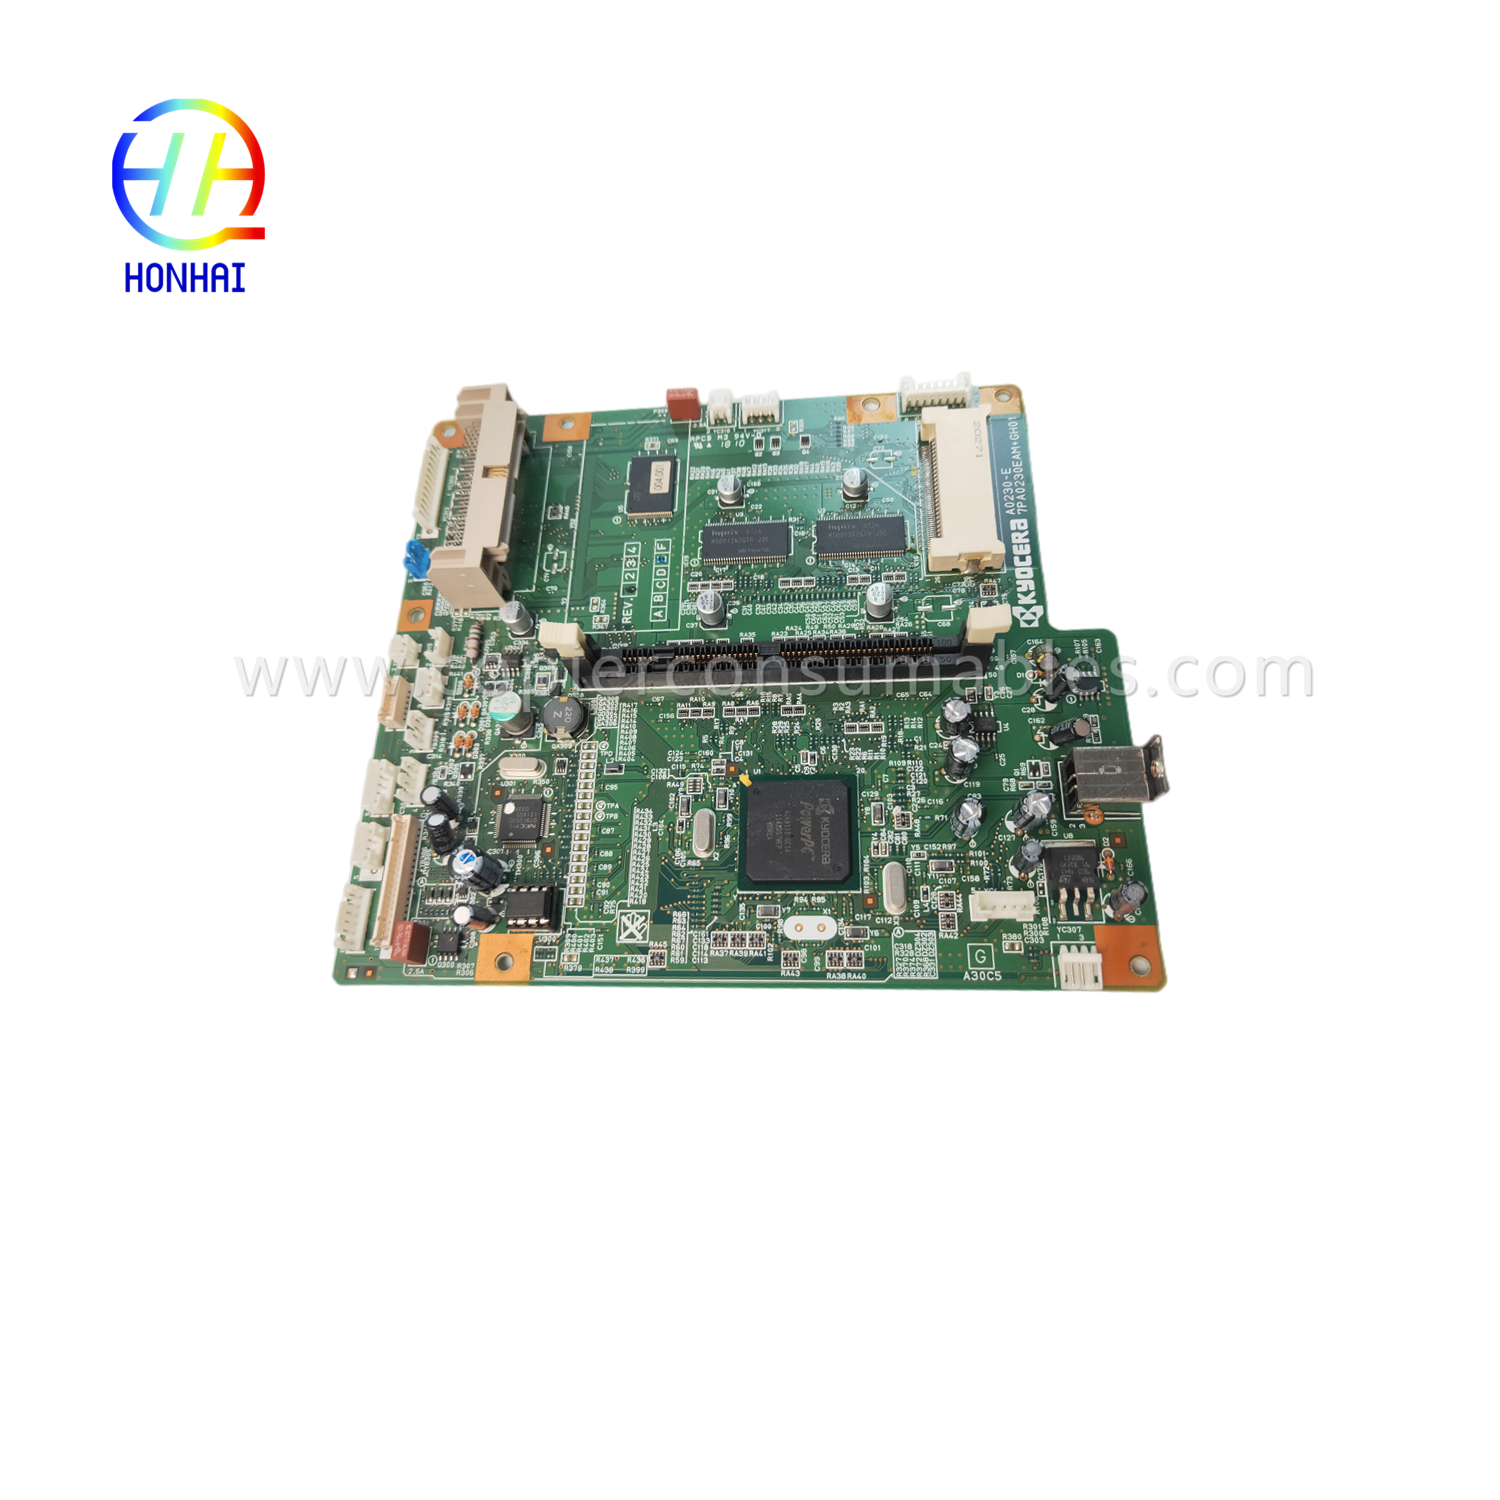 https://c585.goodao.net/mainboard-for-kyocera-fs-1300d-1300dn-7pa0230eamgh01-formatter-board-product/